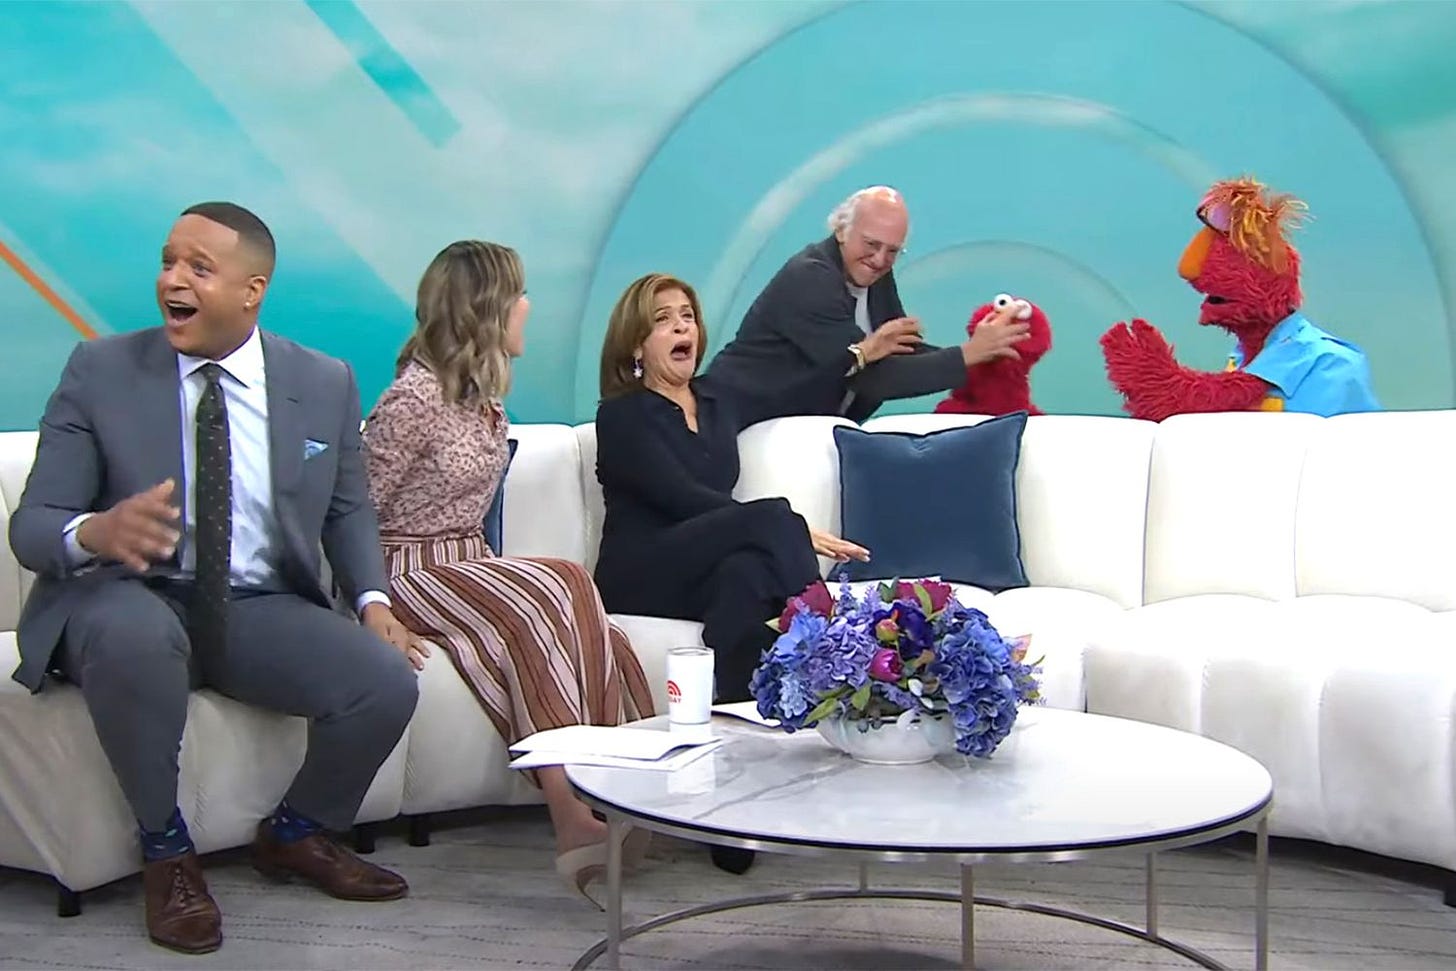 Larry David apologizes after attacking Elmo on 'Today'